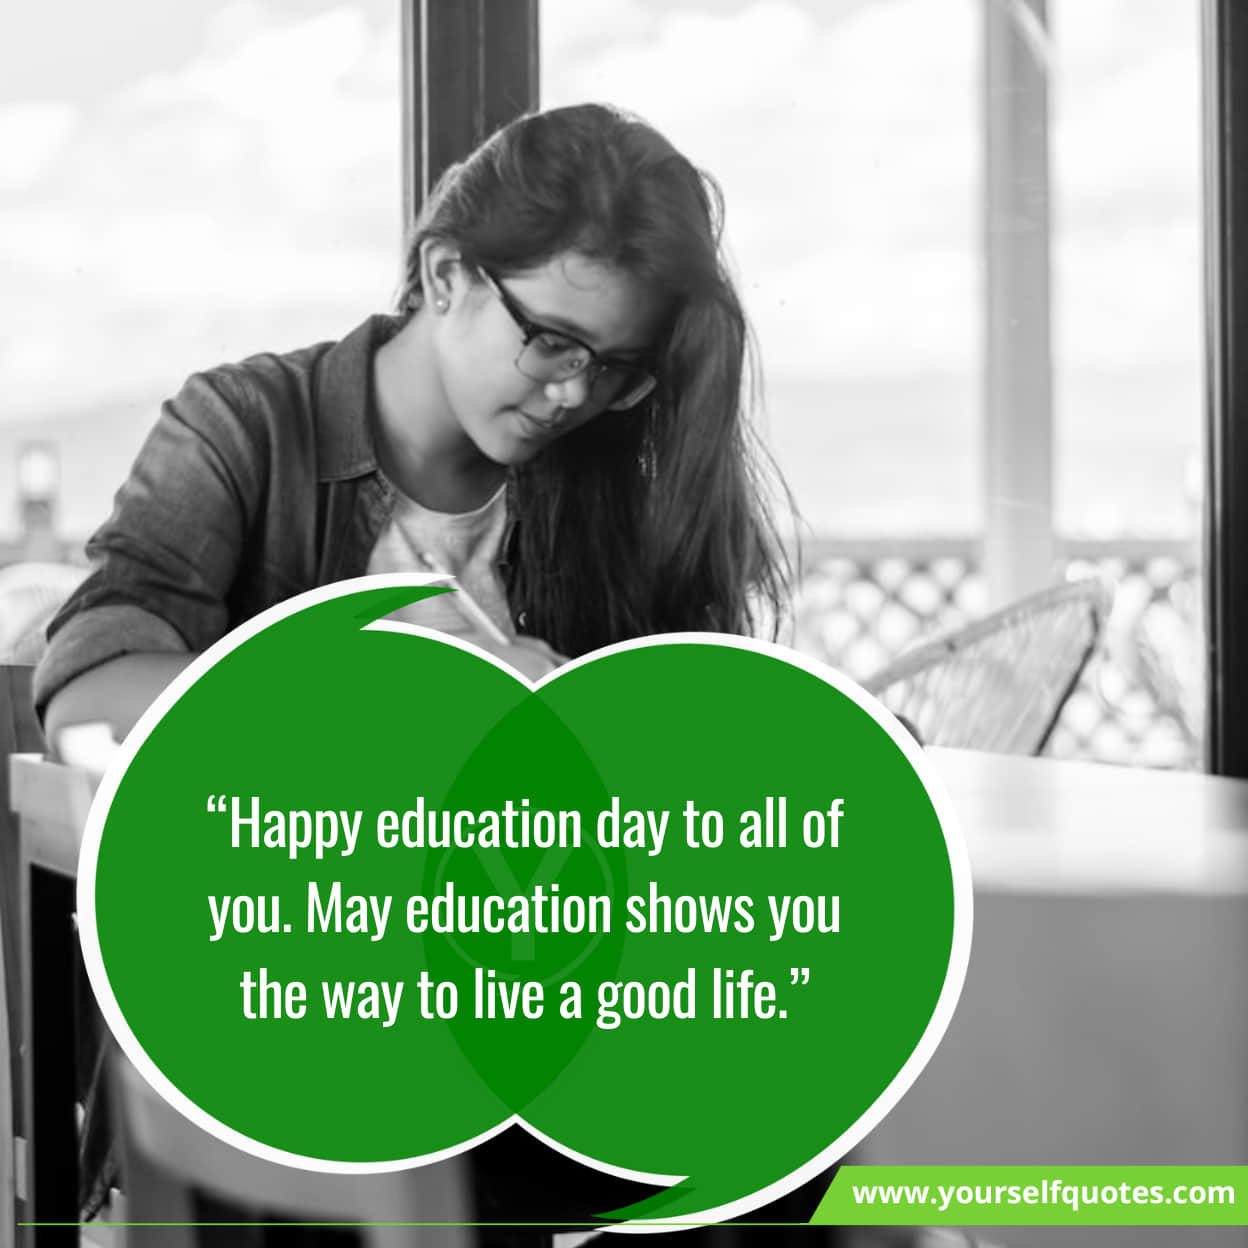 Cheerful Quotes On Education Day